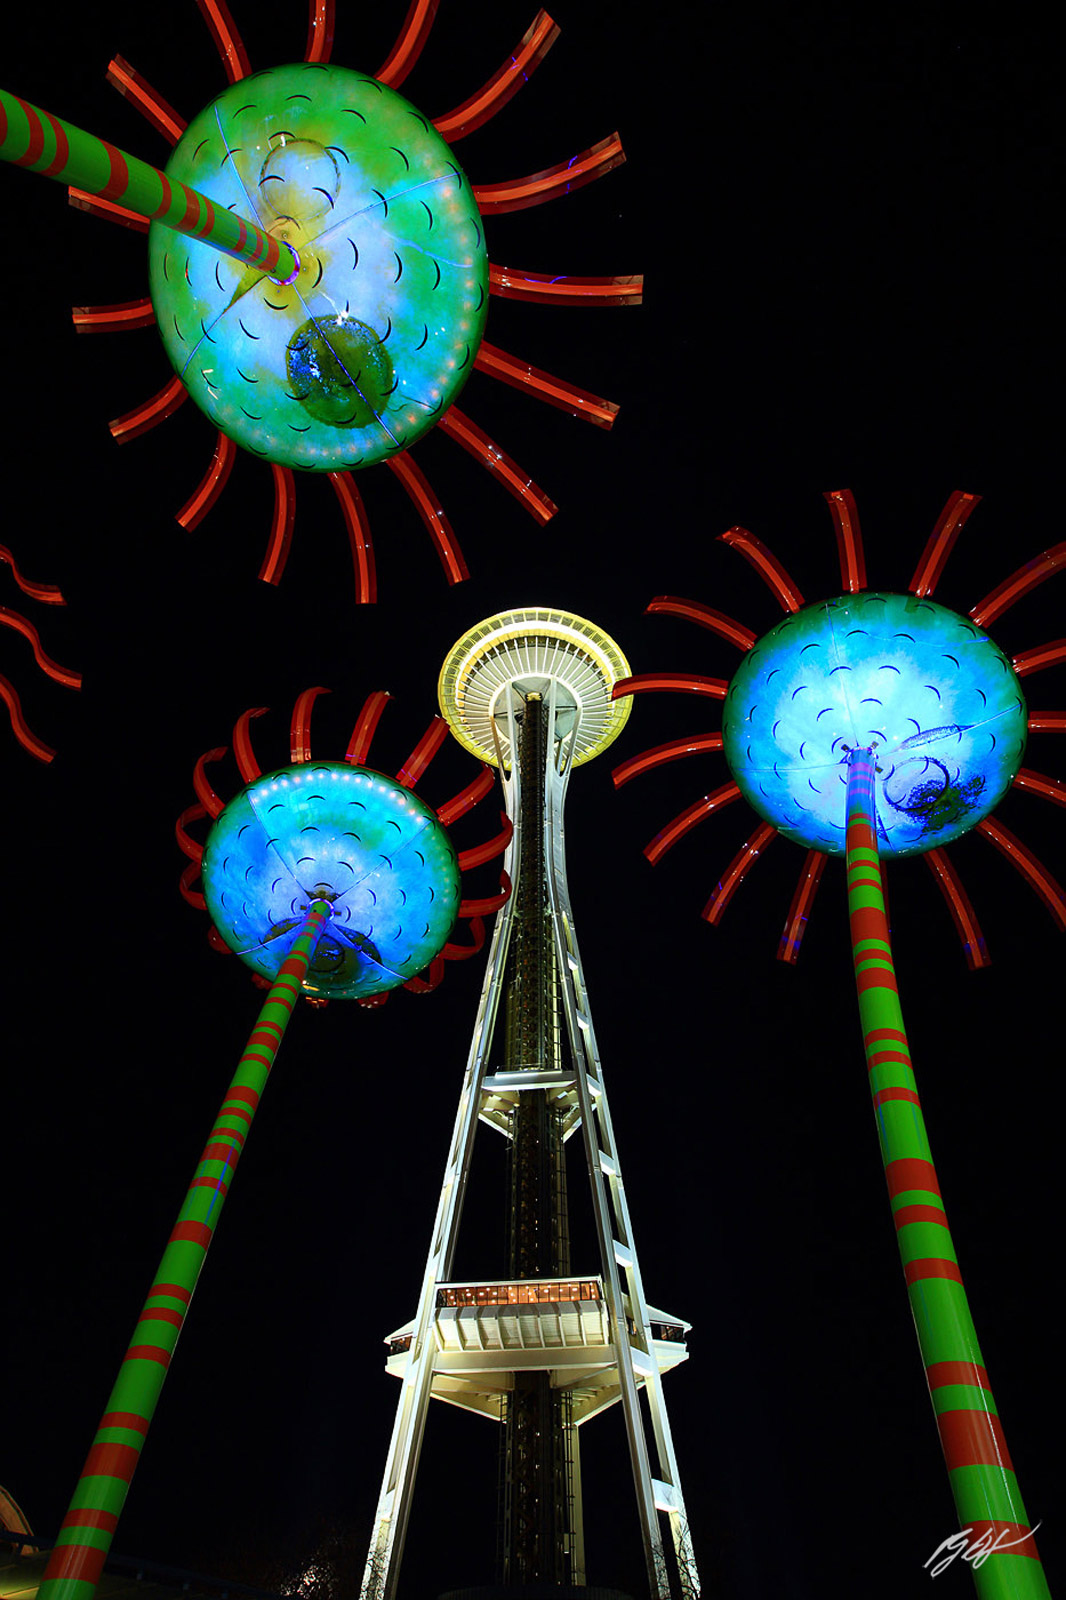 Giant Singing Flower Sculpture and the Space Needle in Seattle Center in Seattle, Washington